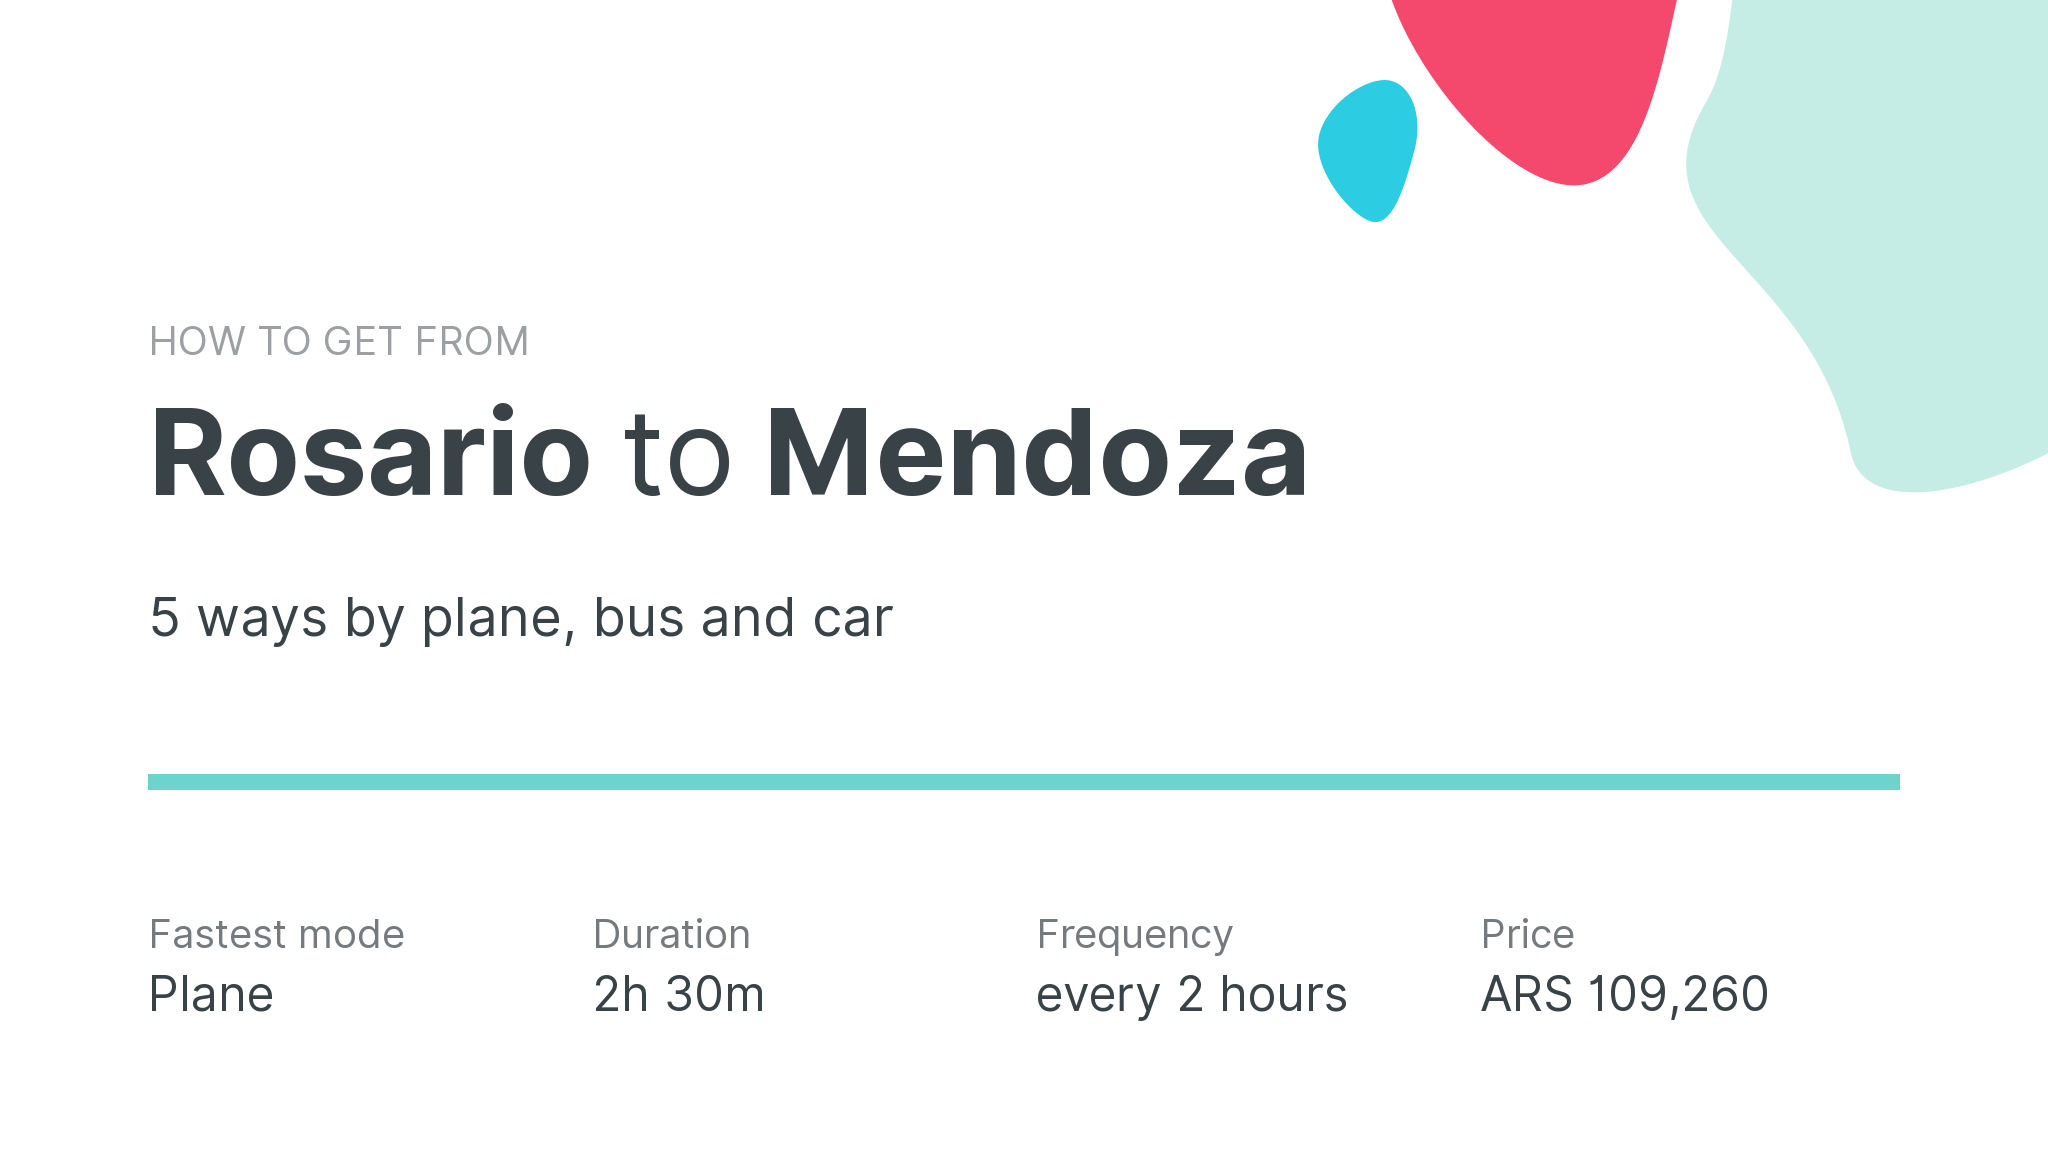 How do I get from Rosario to Mendoza